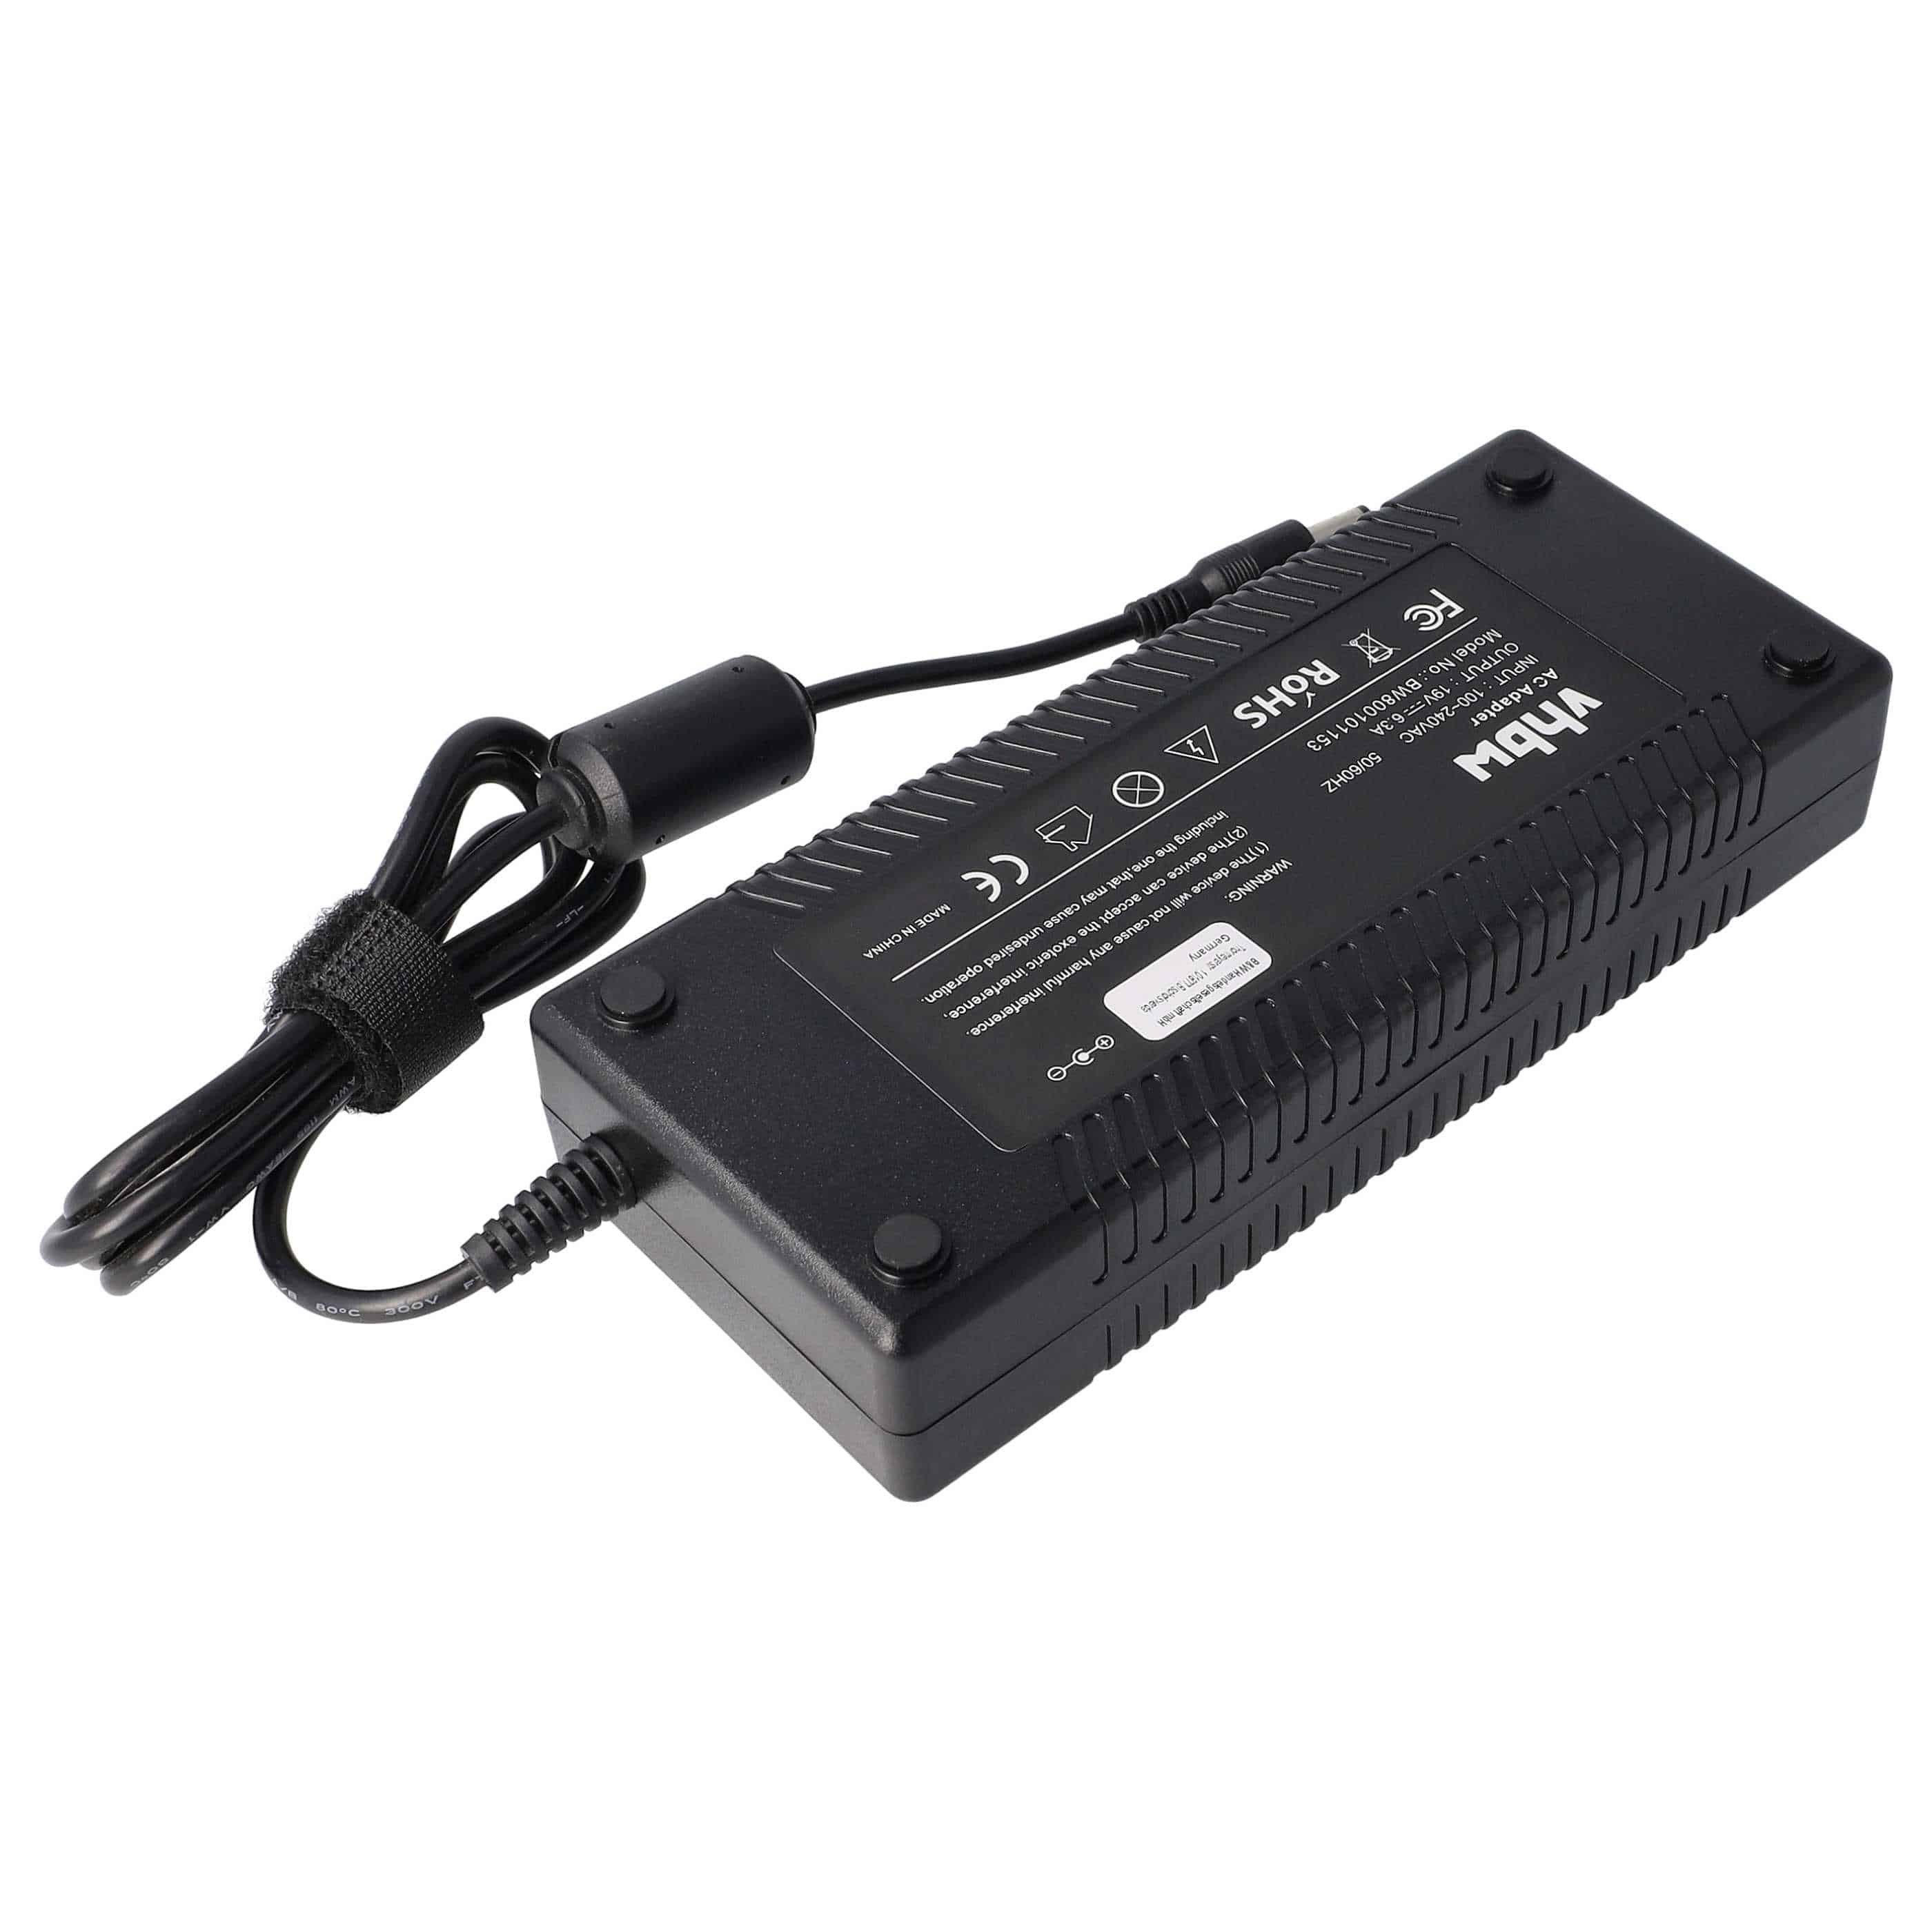 Mains Power Adapter replaces 25.10046.131 for ToshibaNotebook etc., 120 W